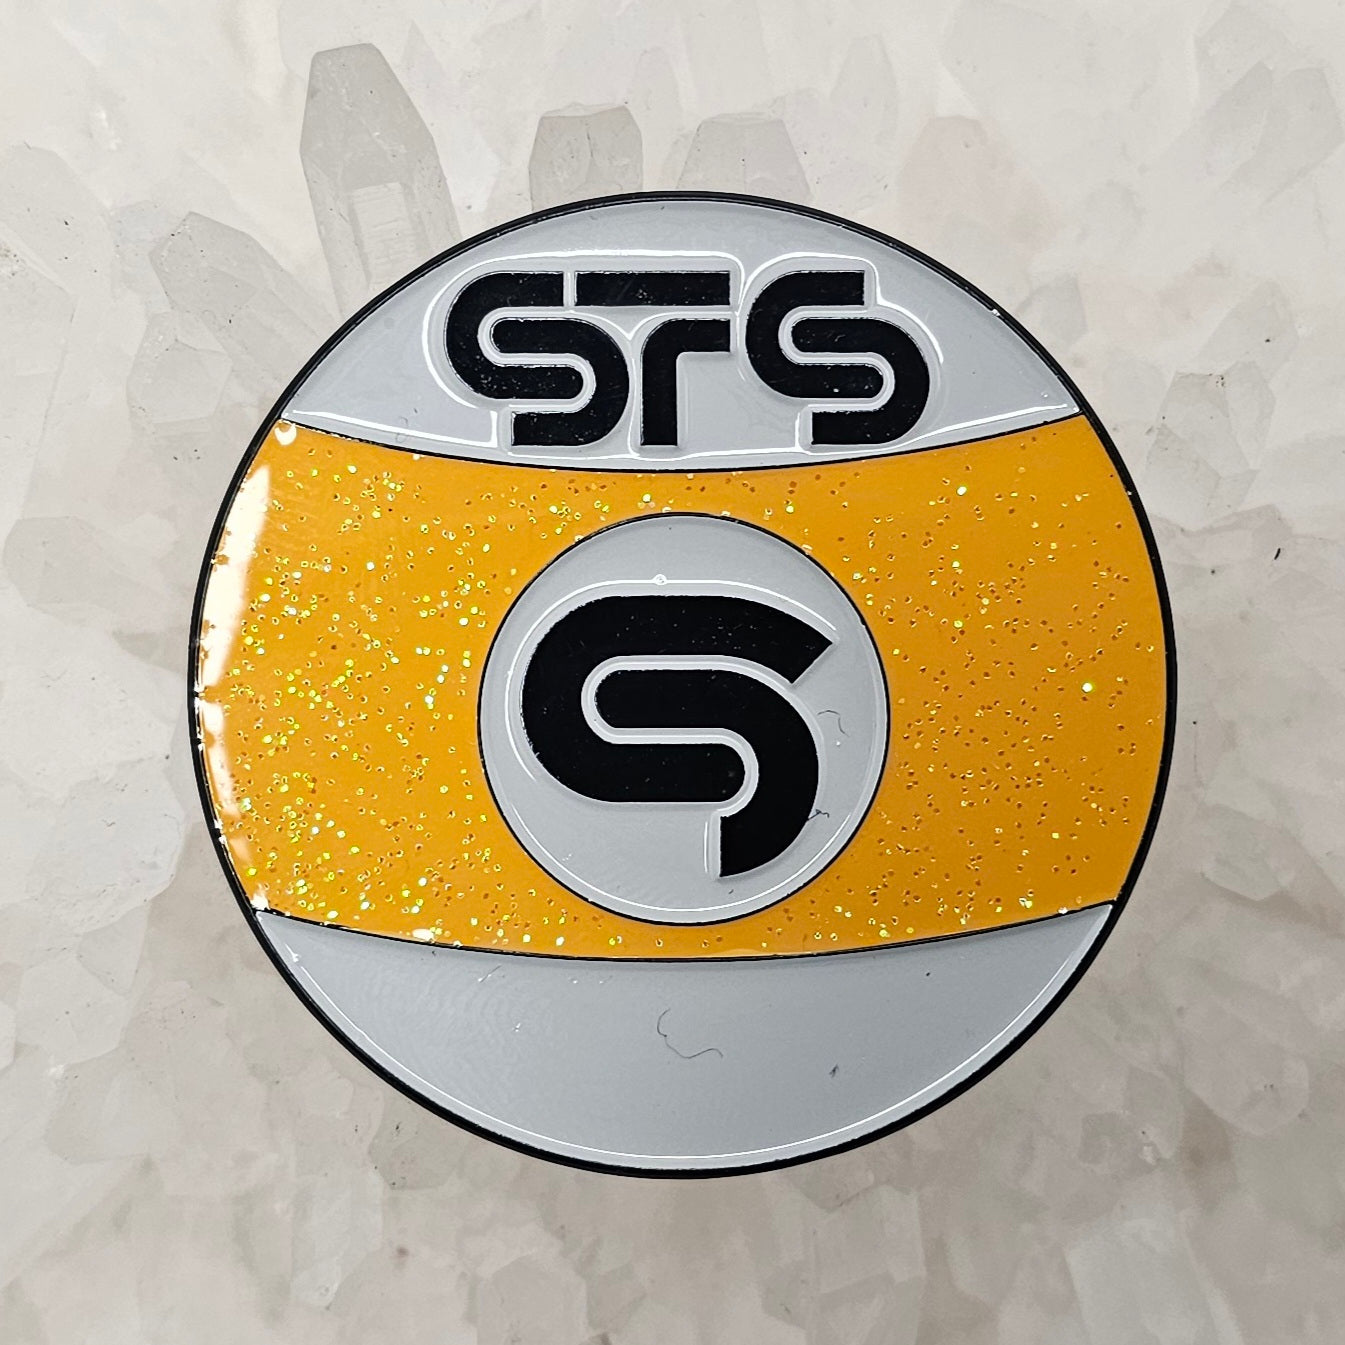 Sound Tribe Sector Sts 9 Ball Jam Band Music Festival Glitter Enamel Pins Hat Pins Lapel Pin Brooch Badge Festival Pin